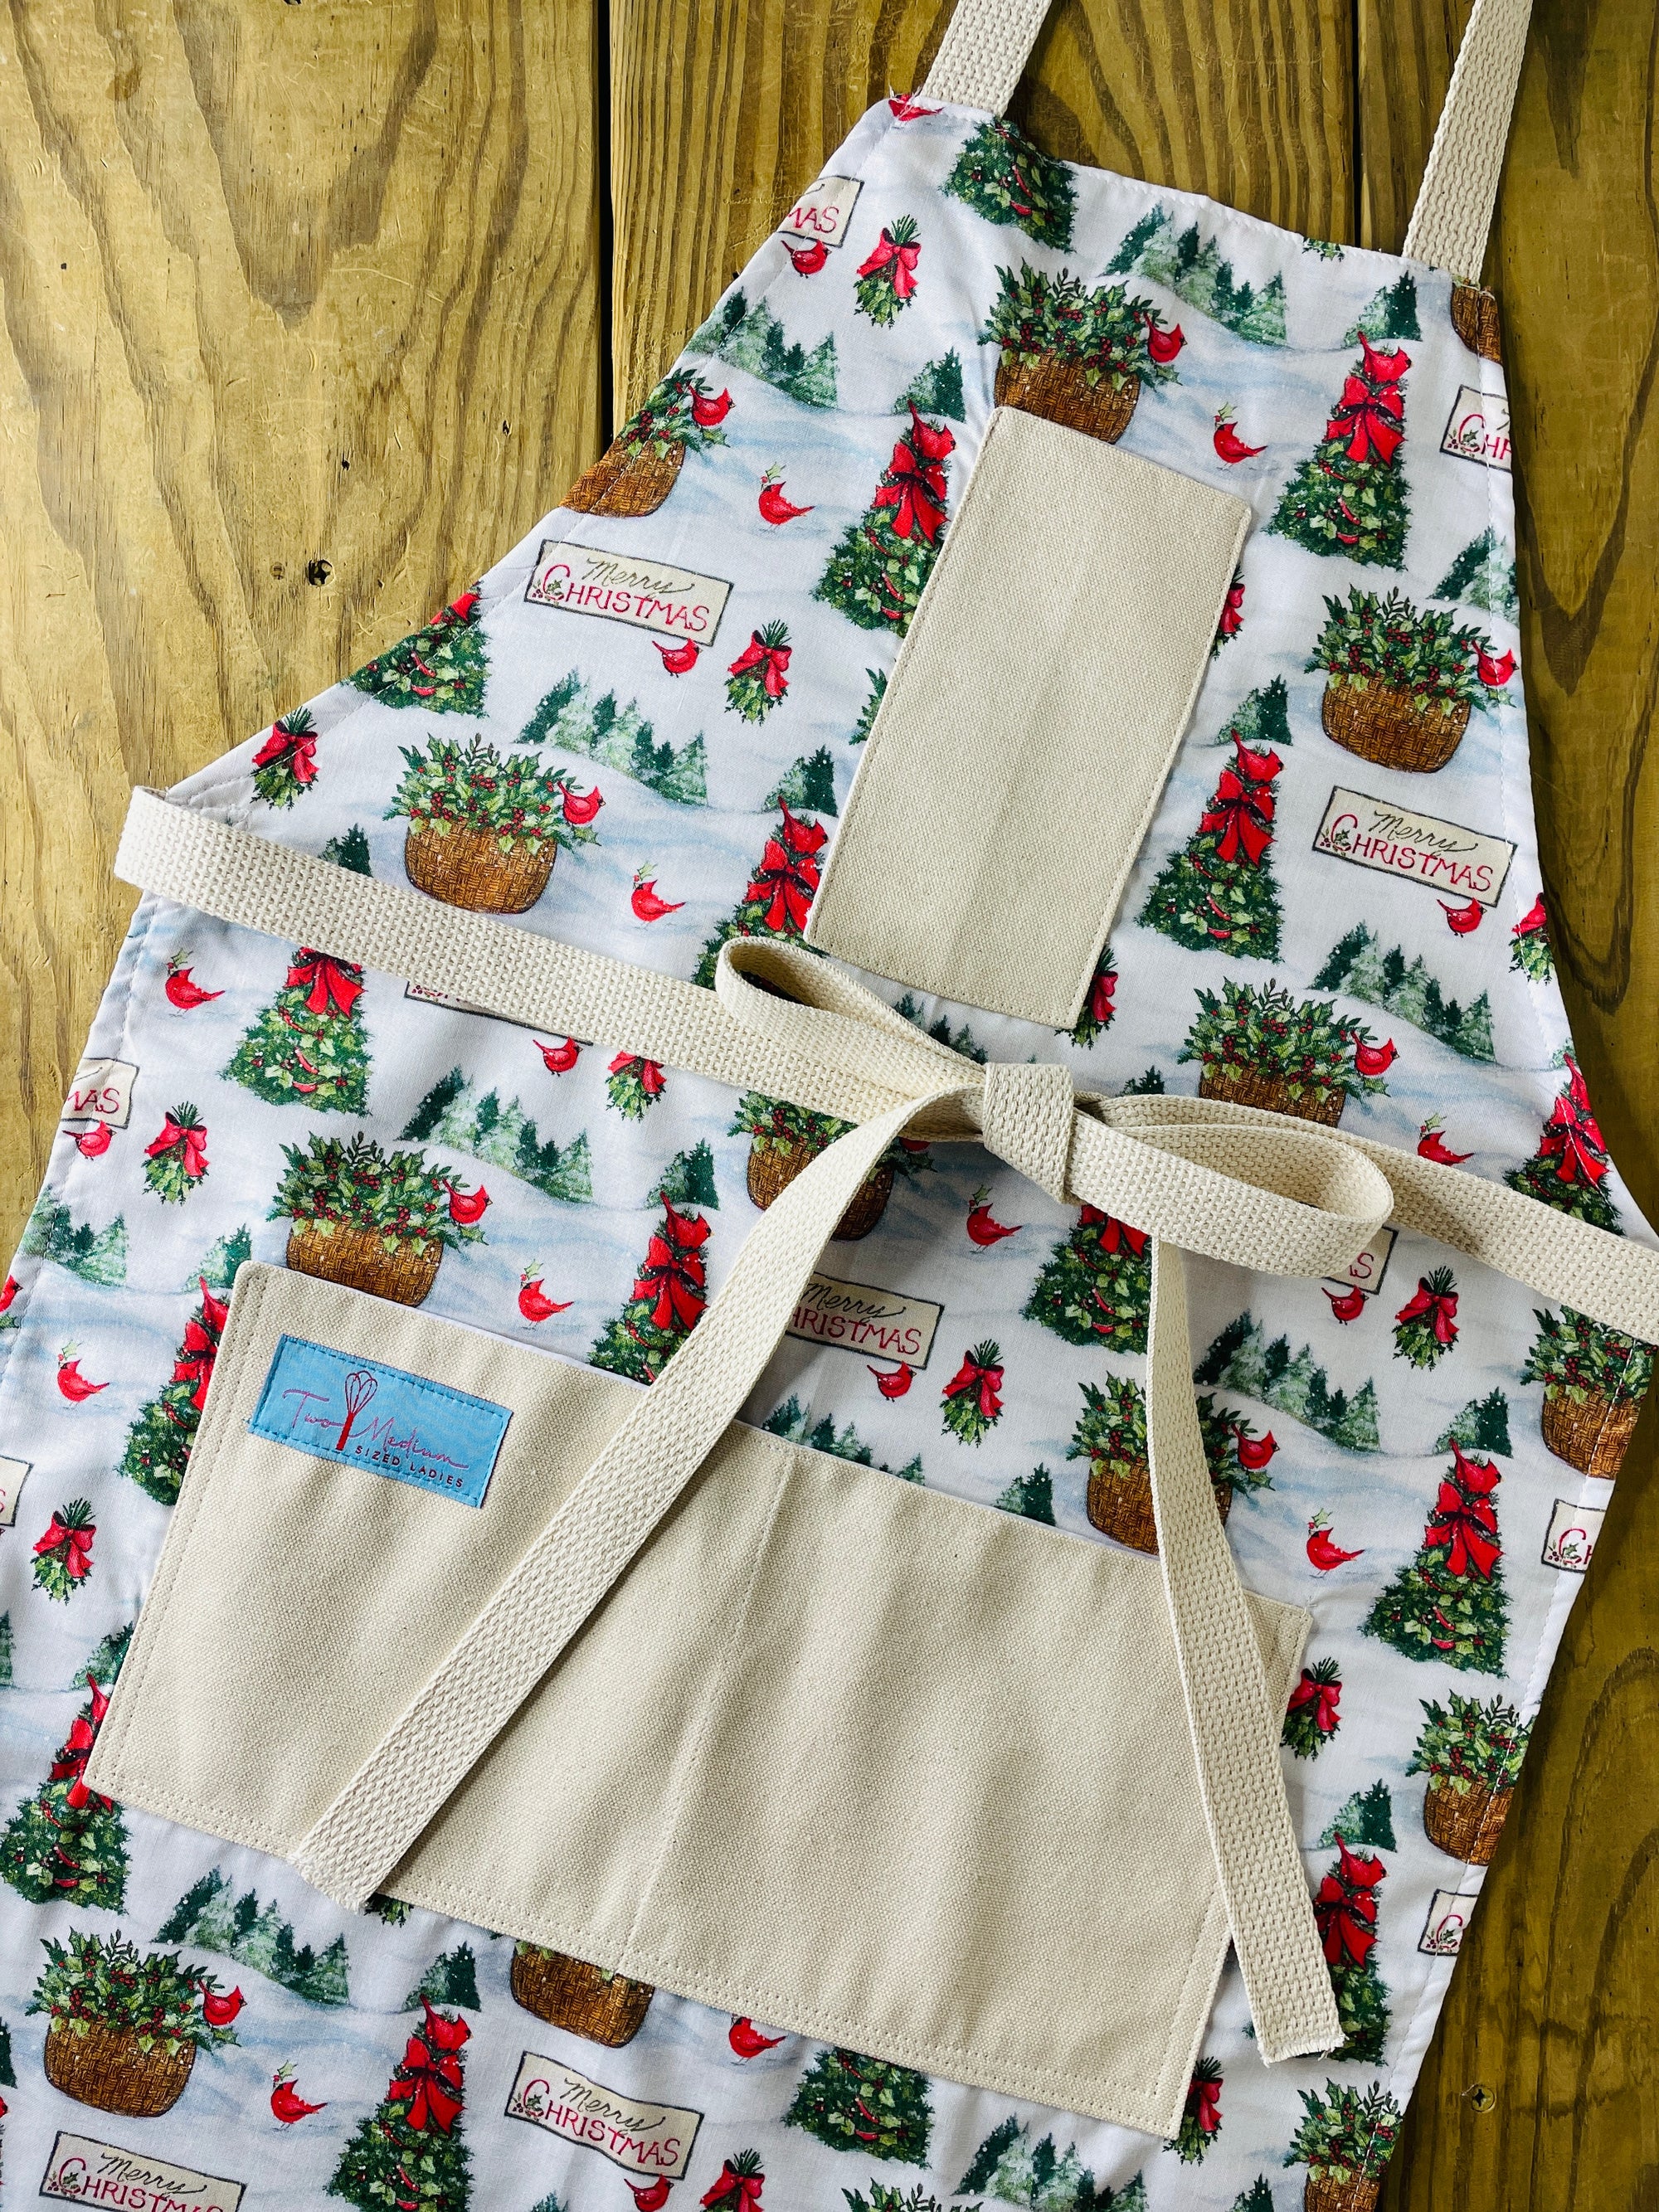 The Canton Christmas Shop Christmas Forest Apron Merry Christmas Trees Cardinal Holly by Two Medium Sized Ladies